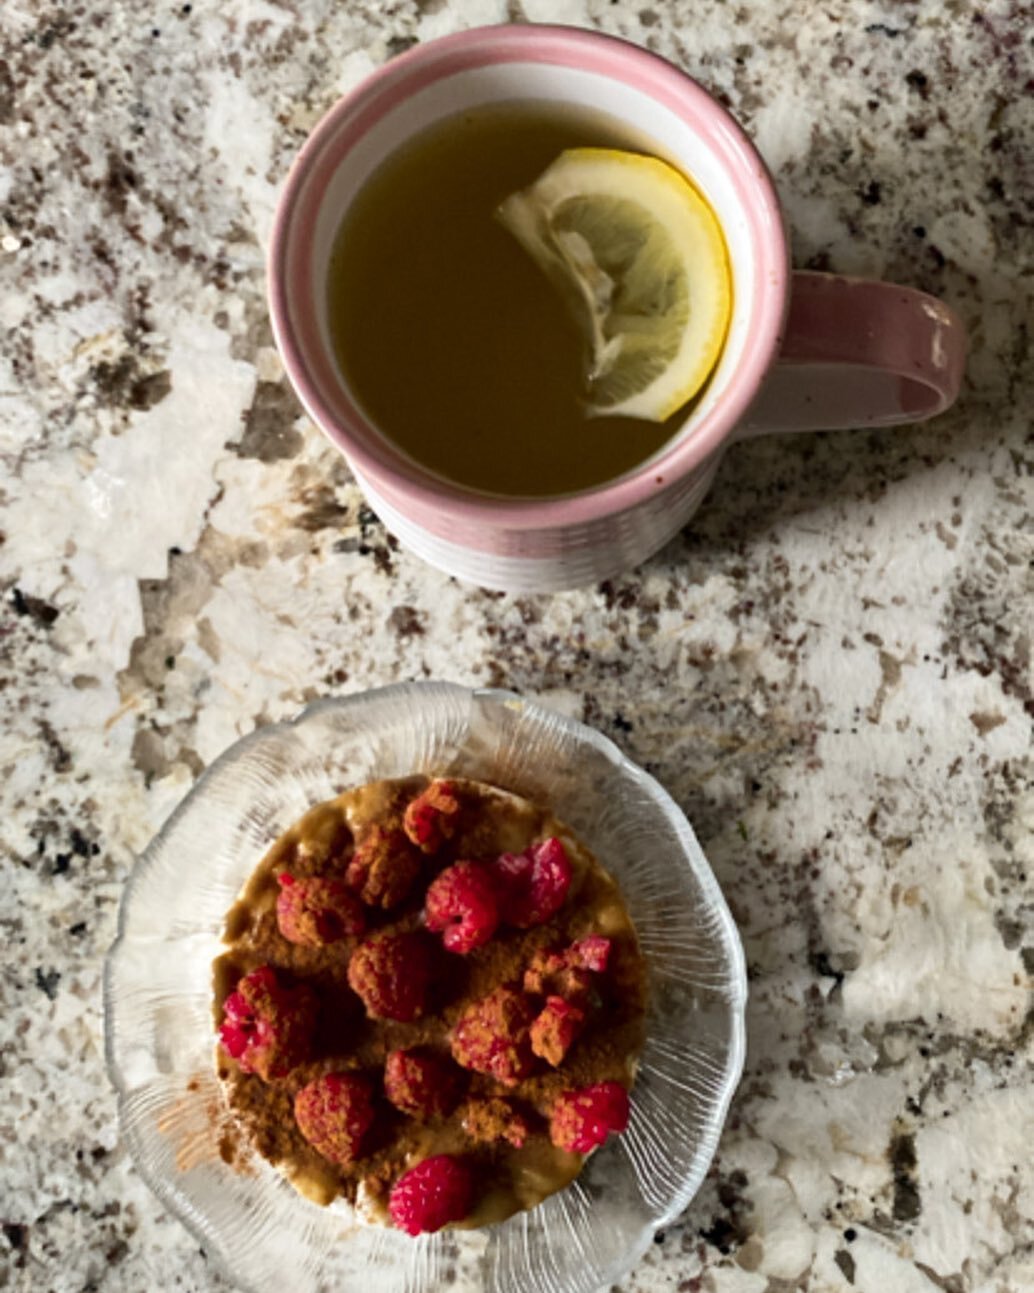 Breakfast to start off the day before a full day of shovelling and then treating patients at the clinic 🍓🍯🍋

to eat: 
- rice cake 
- @wowbutterofficial soy butter 
- raspberries &amp; strawberries 
- cinnamon 

to sip: 
- warm water 
- lemon 
- ho